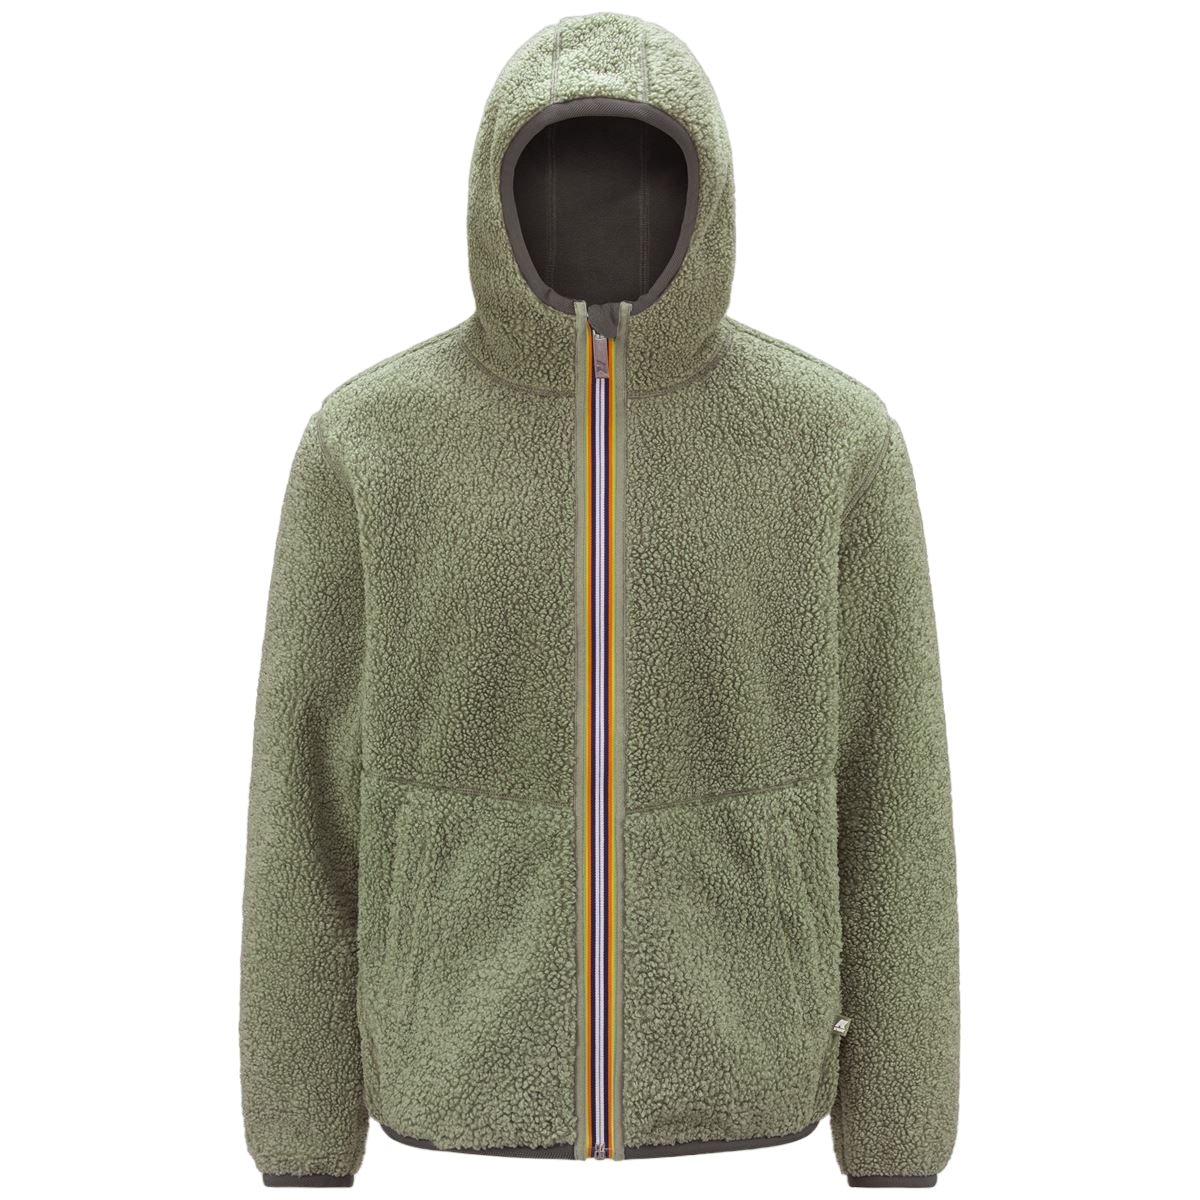 K-way Veste polaire Jacques Sherpa Double Green B - Green S - Lothaire